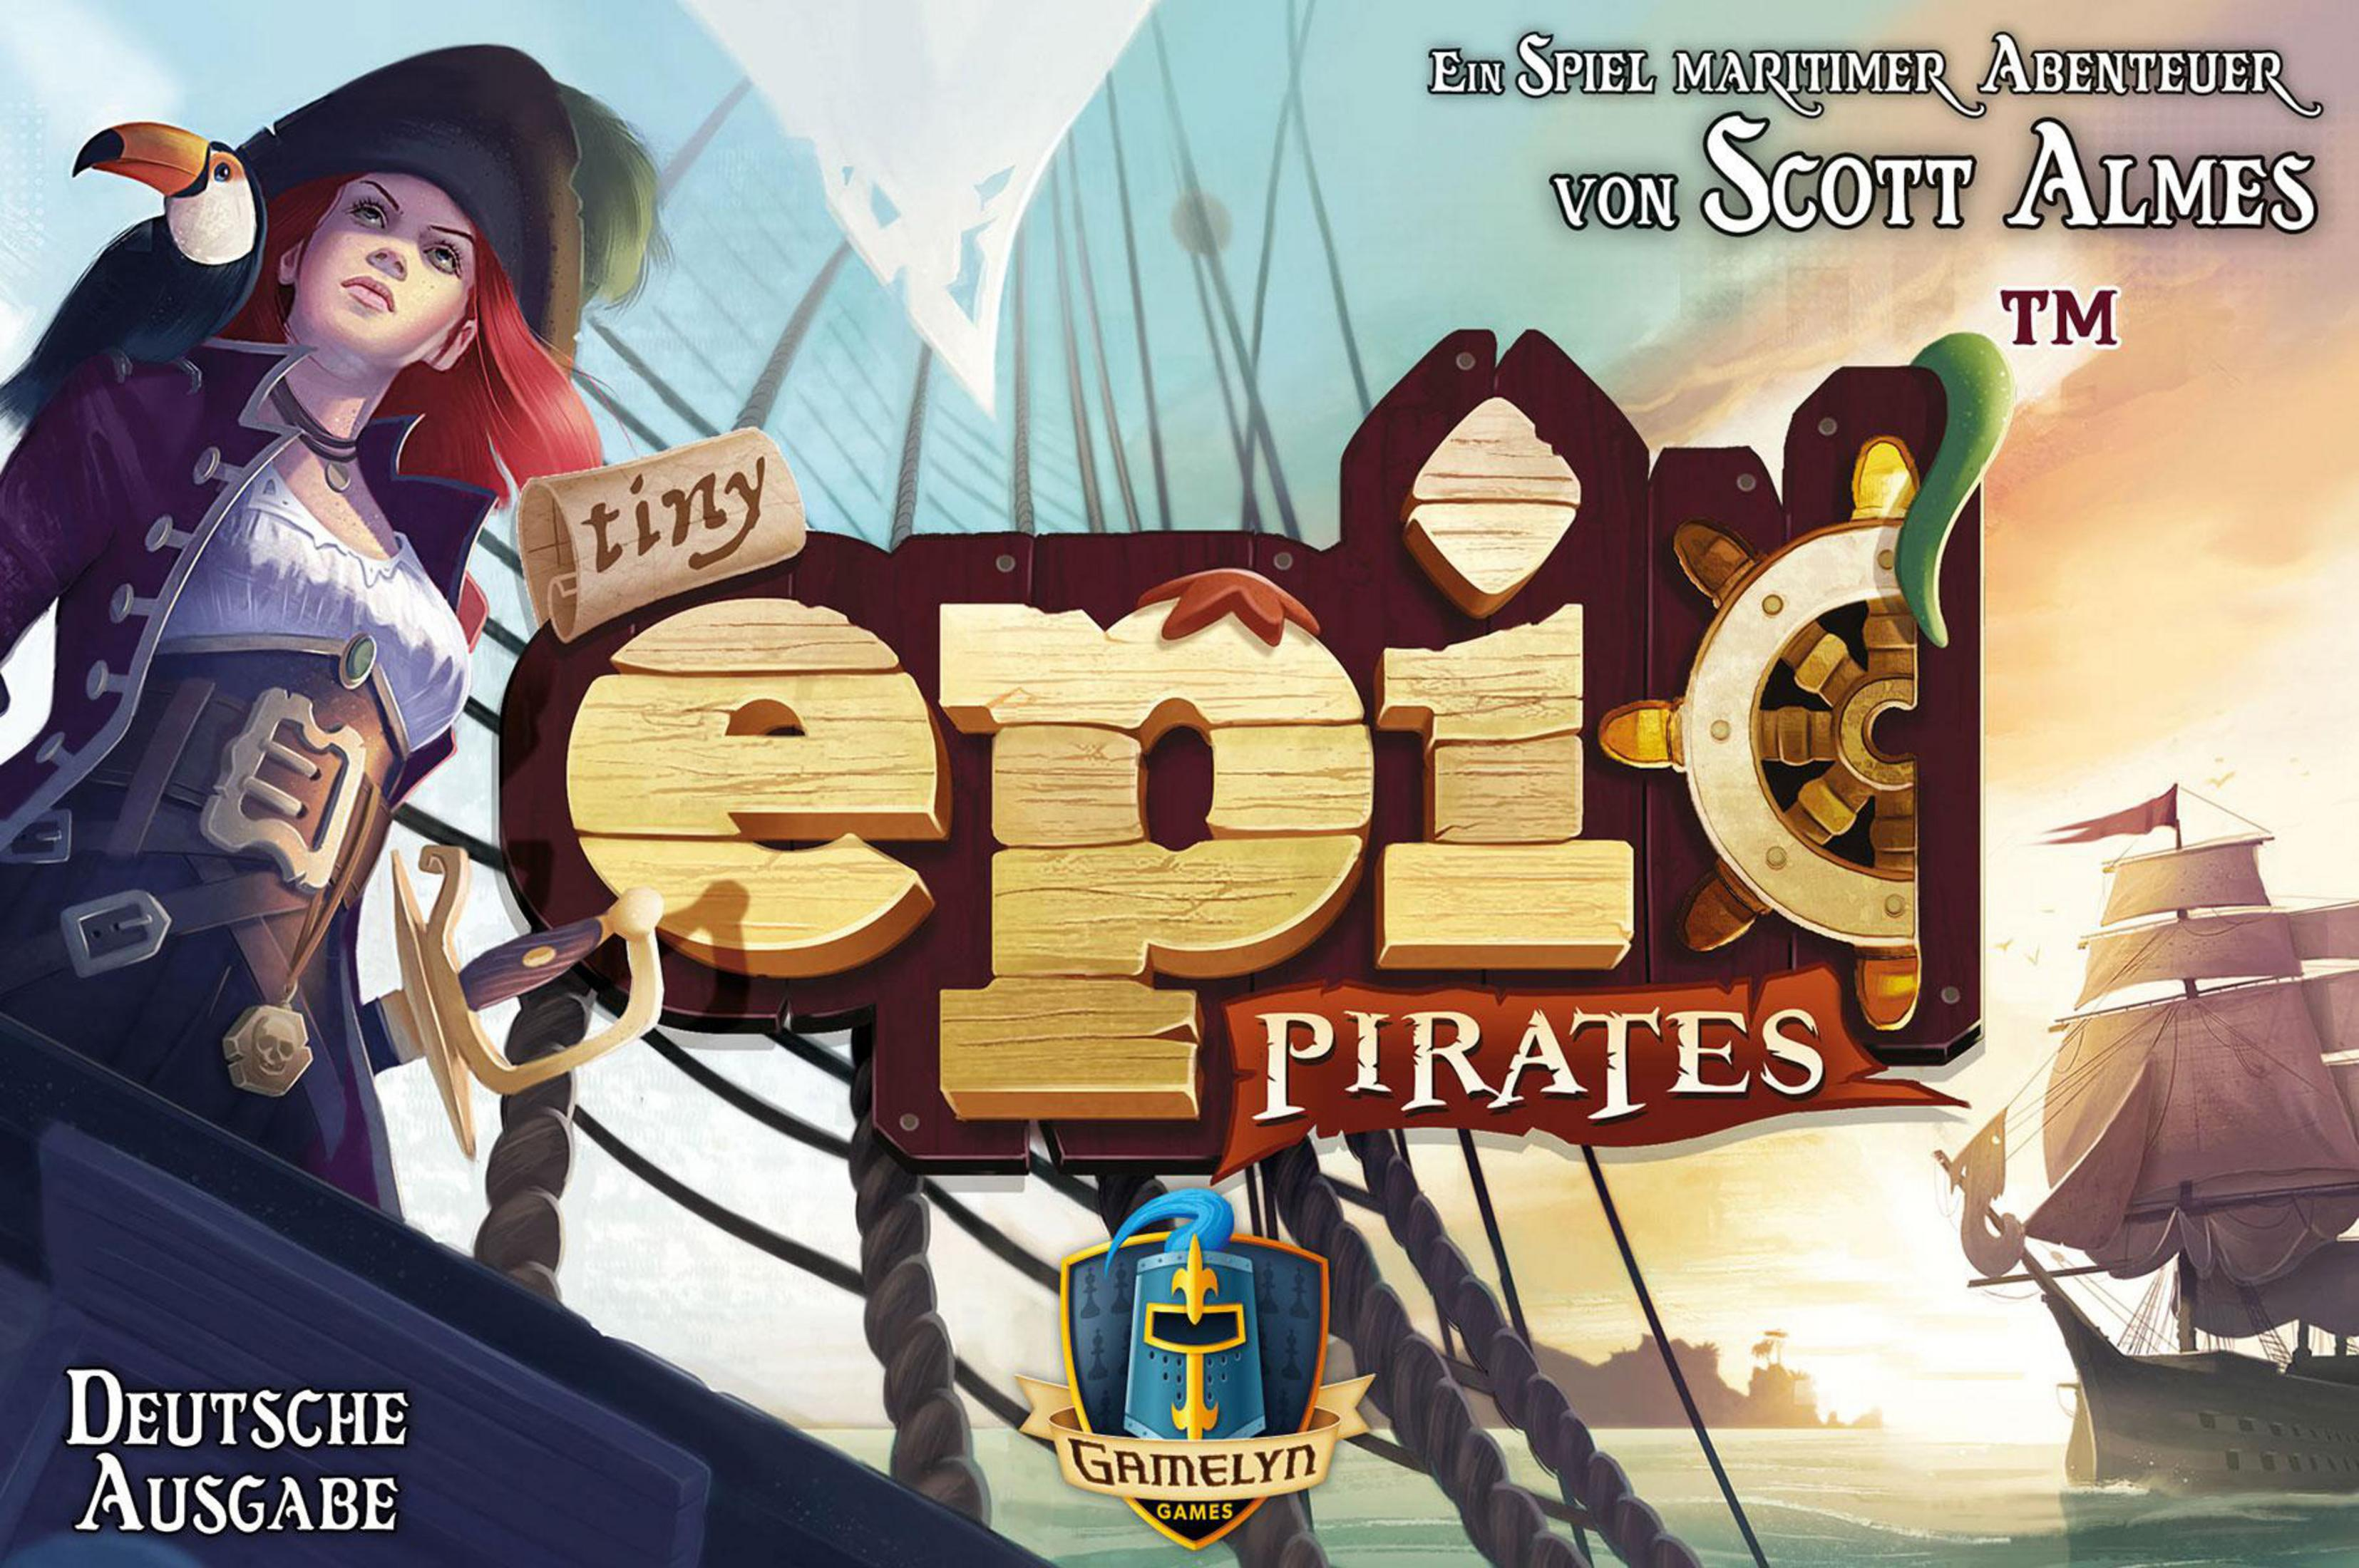 EPIC ASMODEE TINY Familienspiel PIRATES GAMD0003